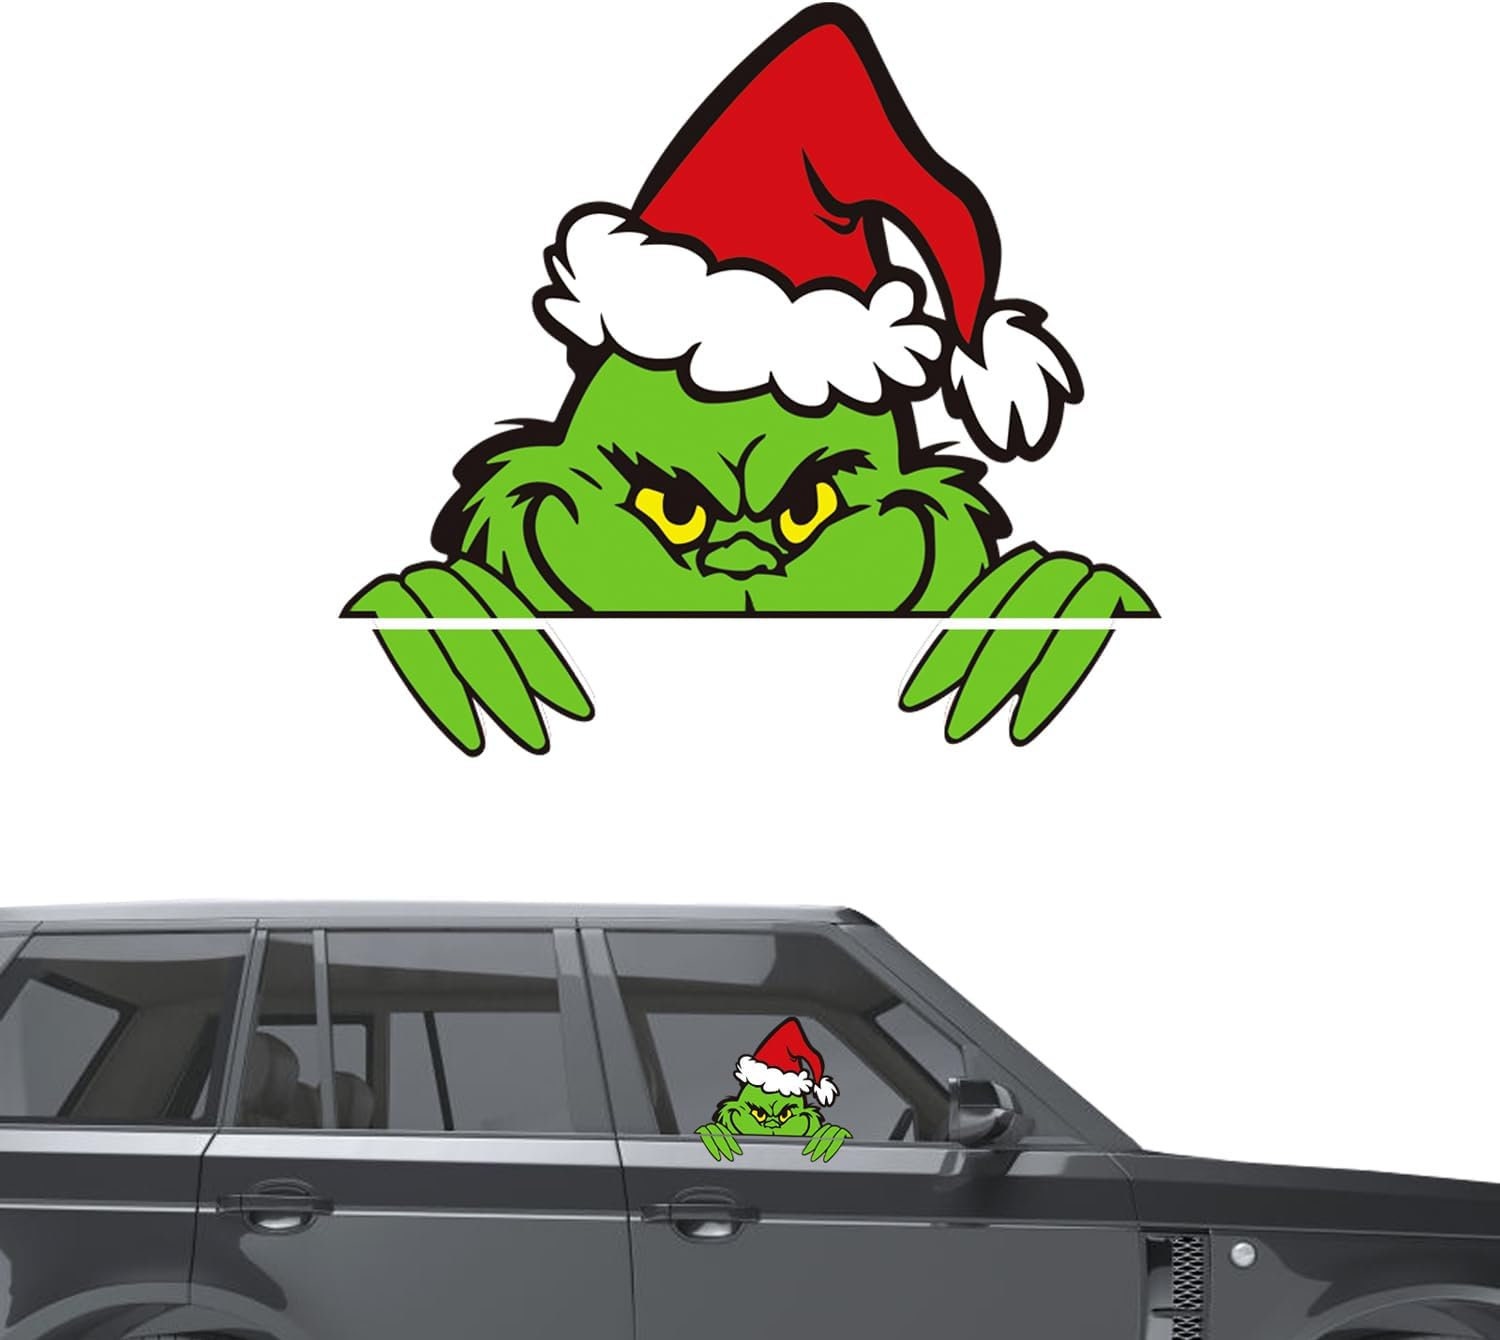 Smiling Grinning Grinch Face with or without Yellow Eyes Vinyl Decal Sticker